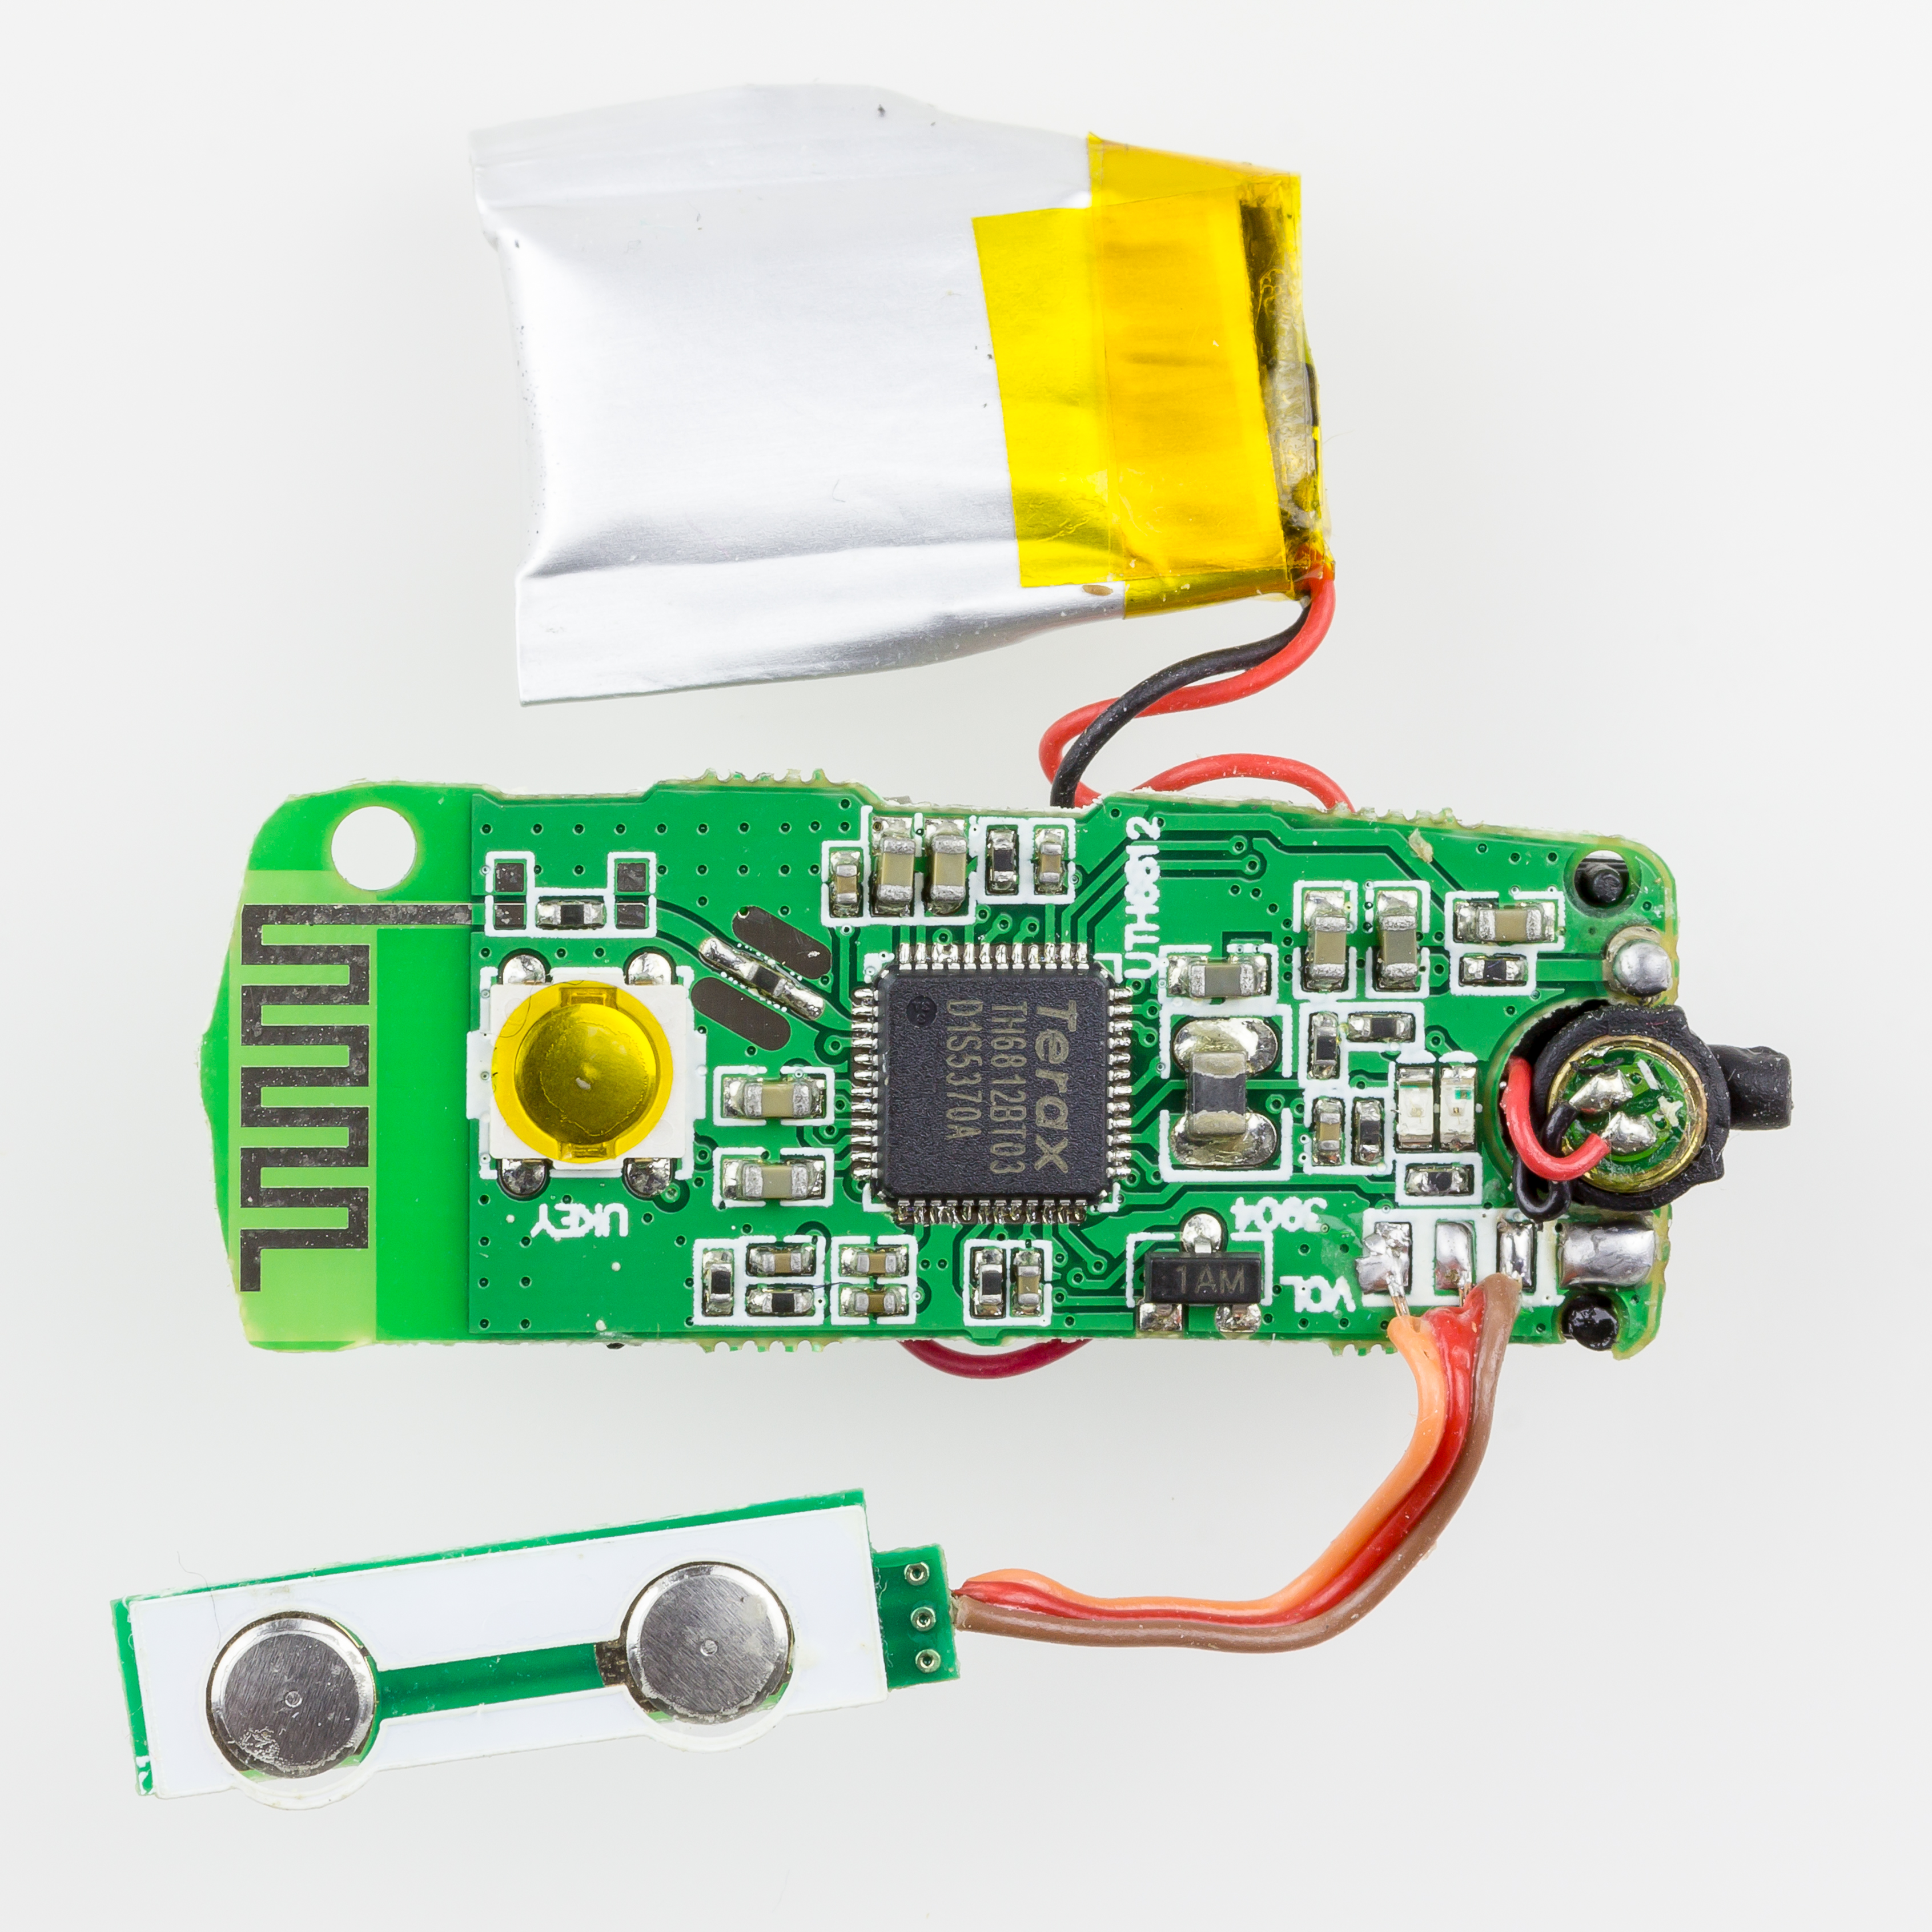 File:Bluetooth headset WEP-200 - printed circuit board with  battery-9691.jpg - Wikimedia Commons